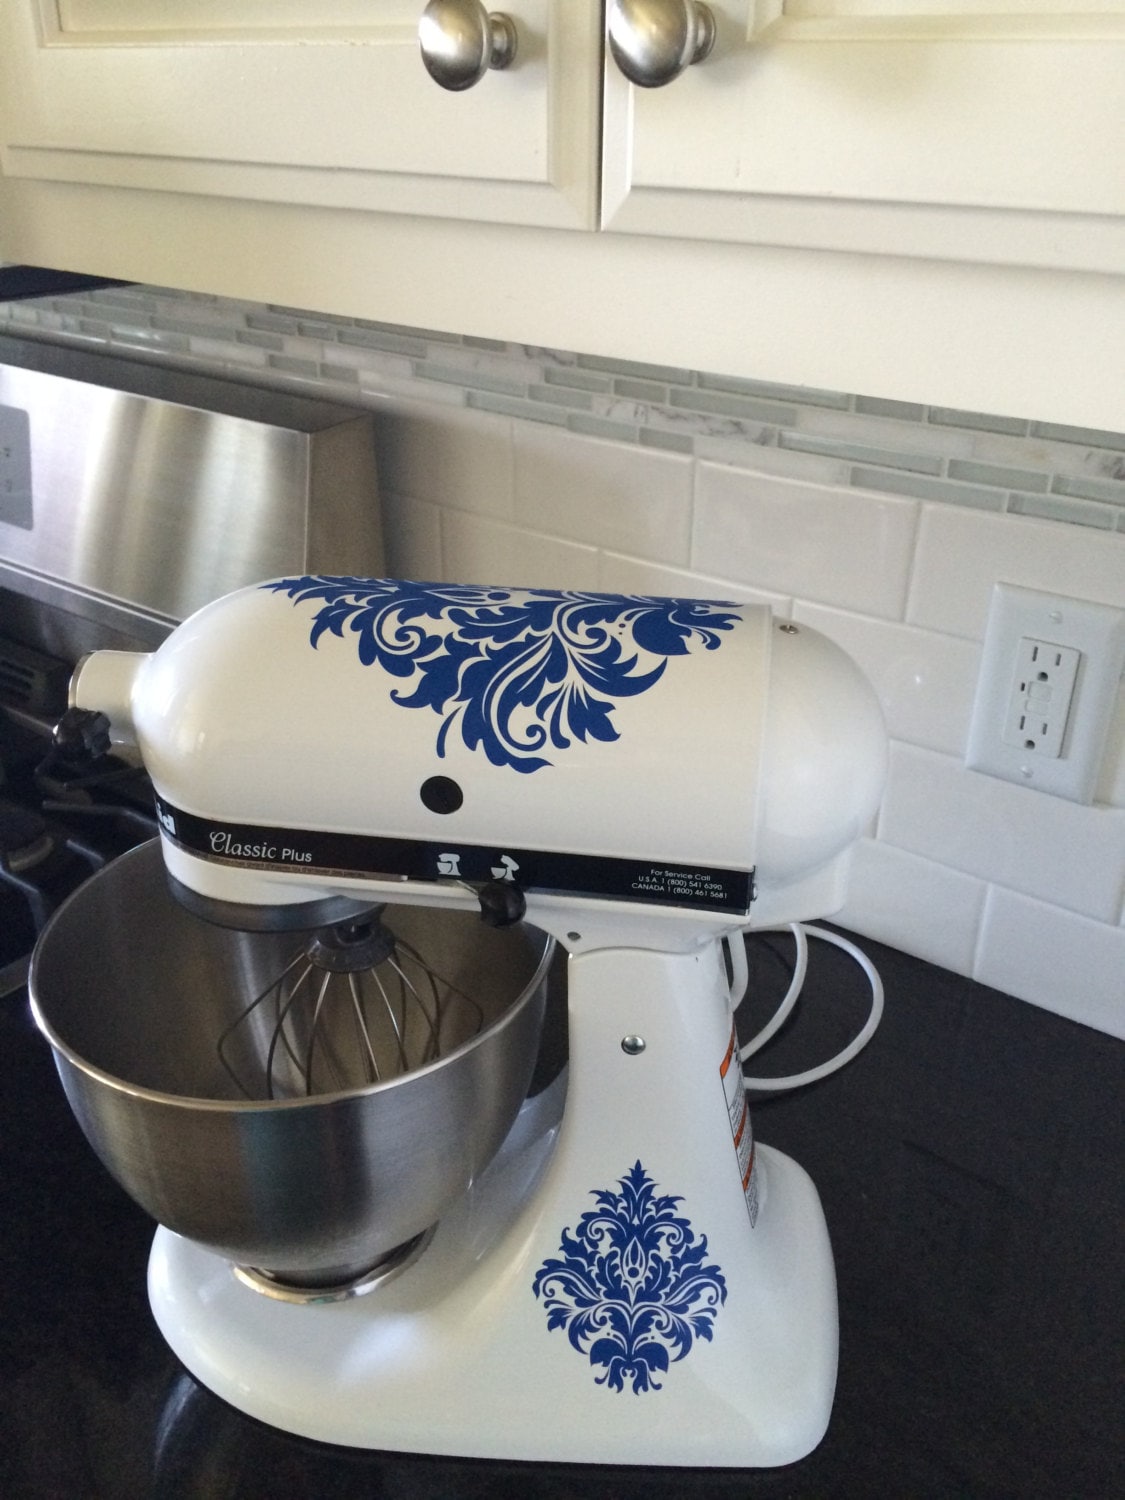 Kitchen Mixer Decal Funny Decor , Baking Vinyl Sticker for Stand Mixer  Decoration